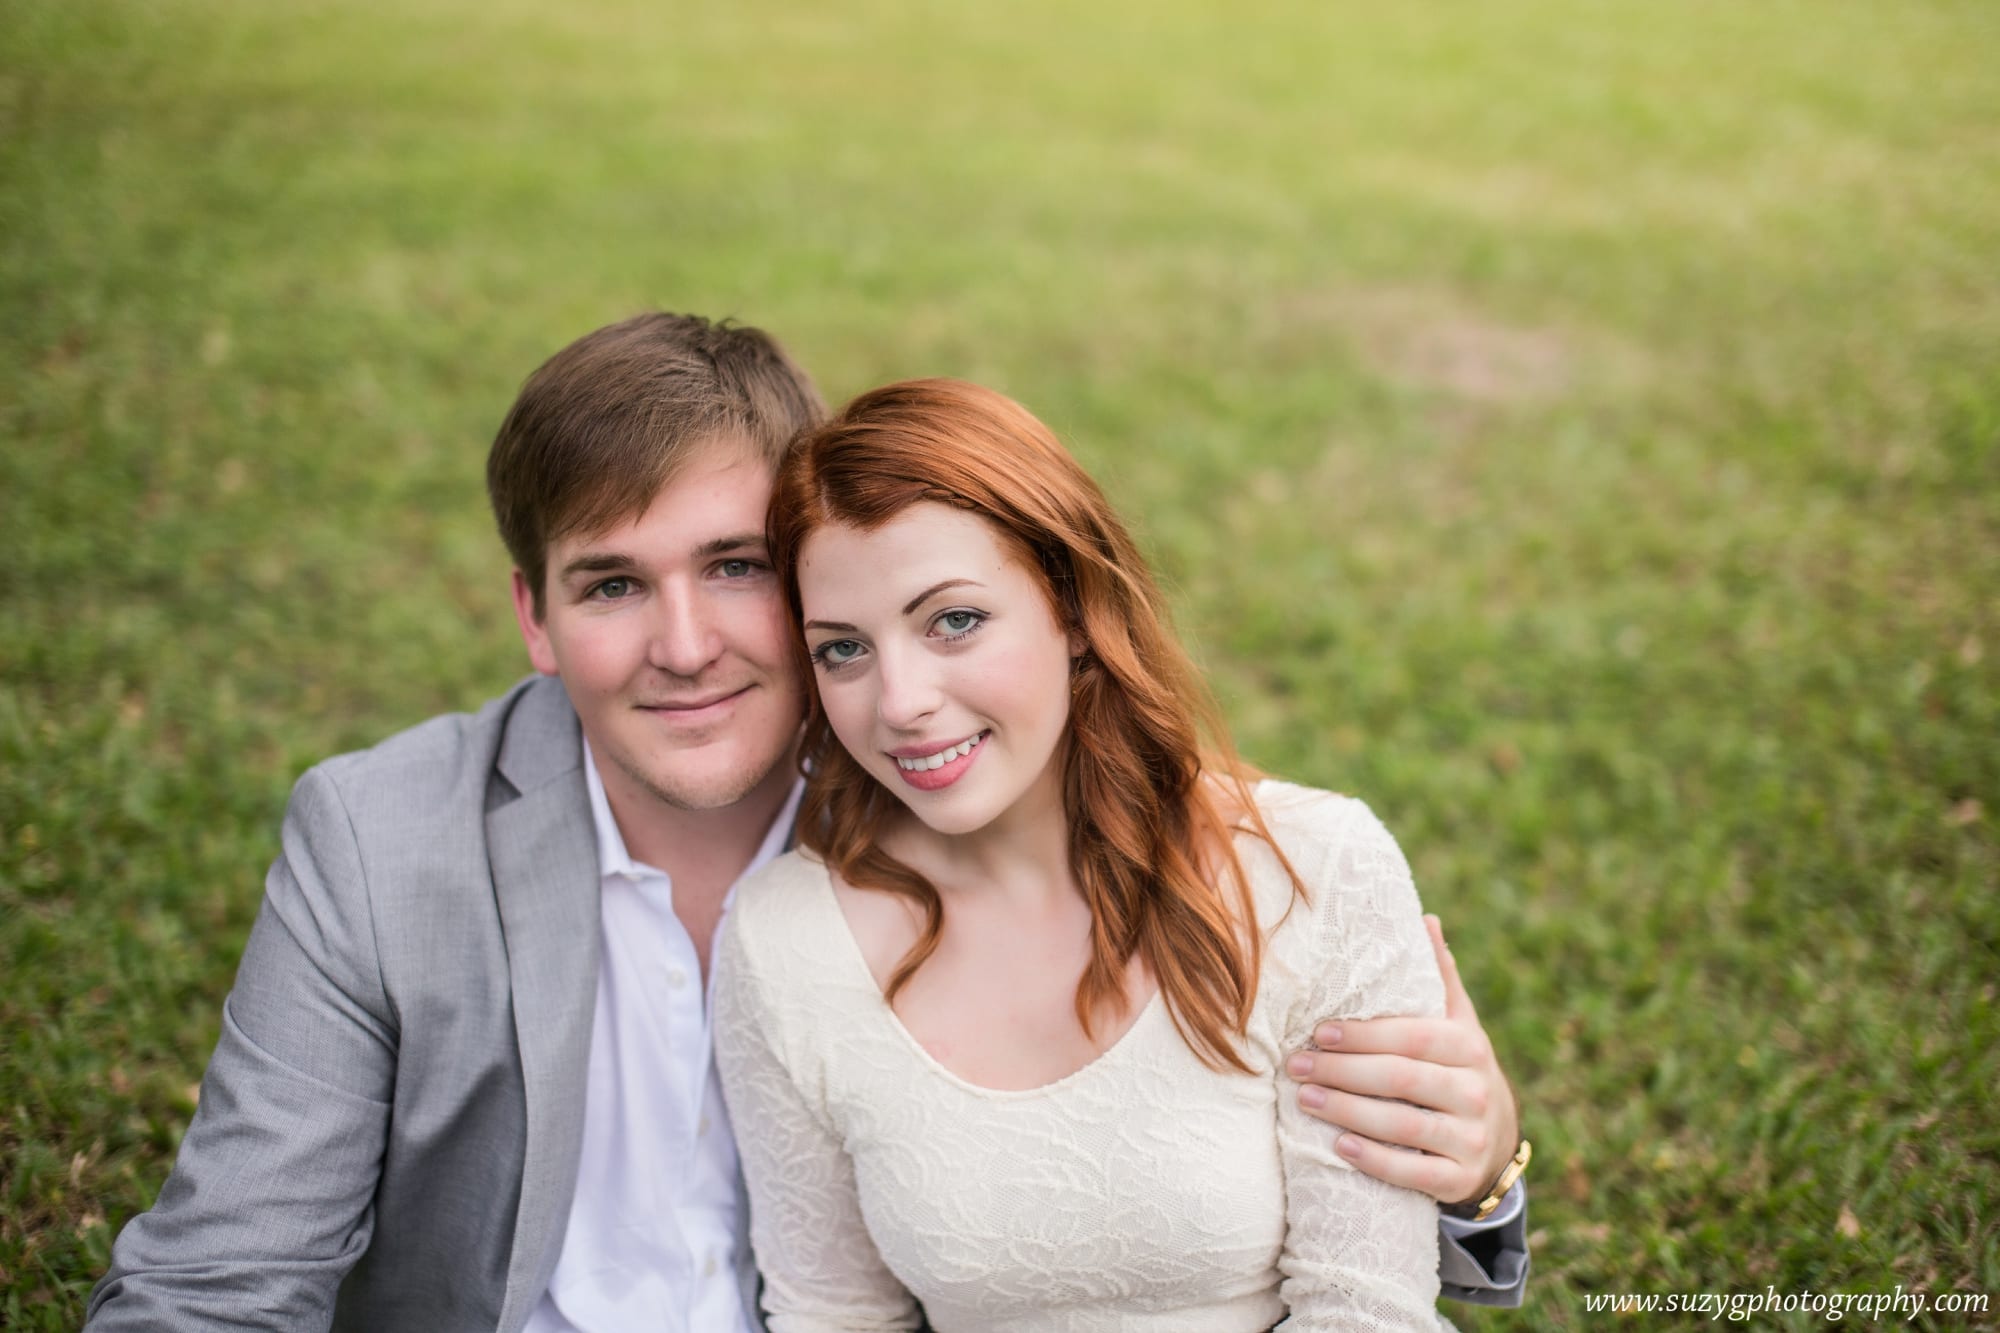 engagements-new orleans-texas-baton rouge-lake charles-suzy g-photography-suzygphotography_0135